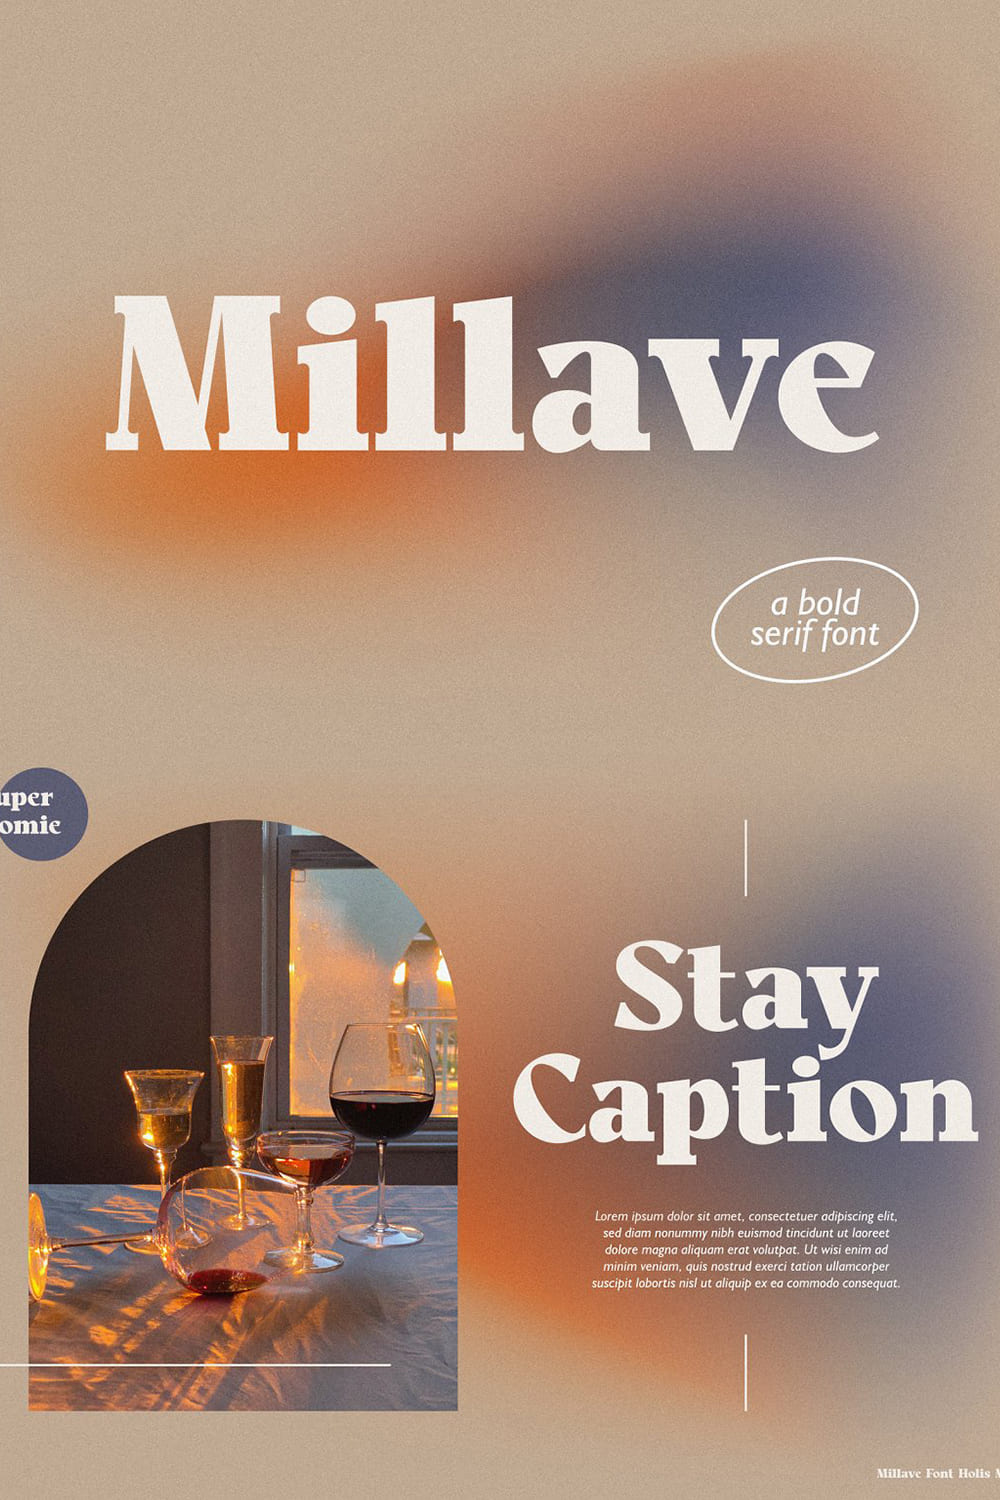 Millave Serif Preview - A Bold Serif Font"Stay Caption".